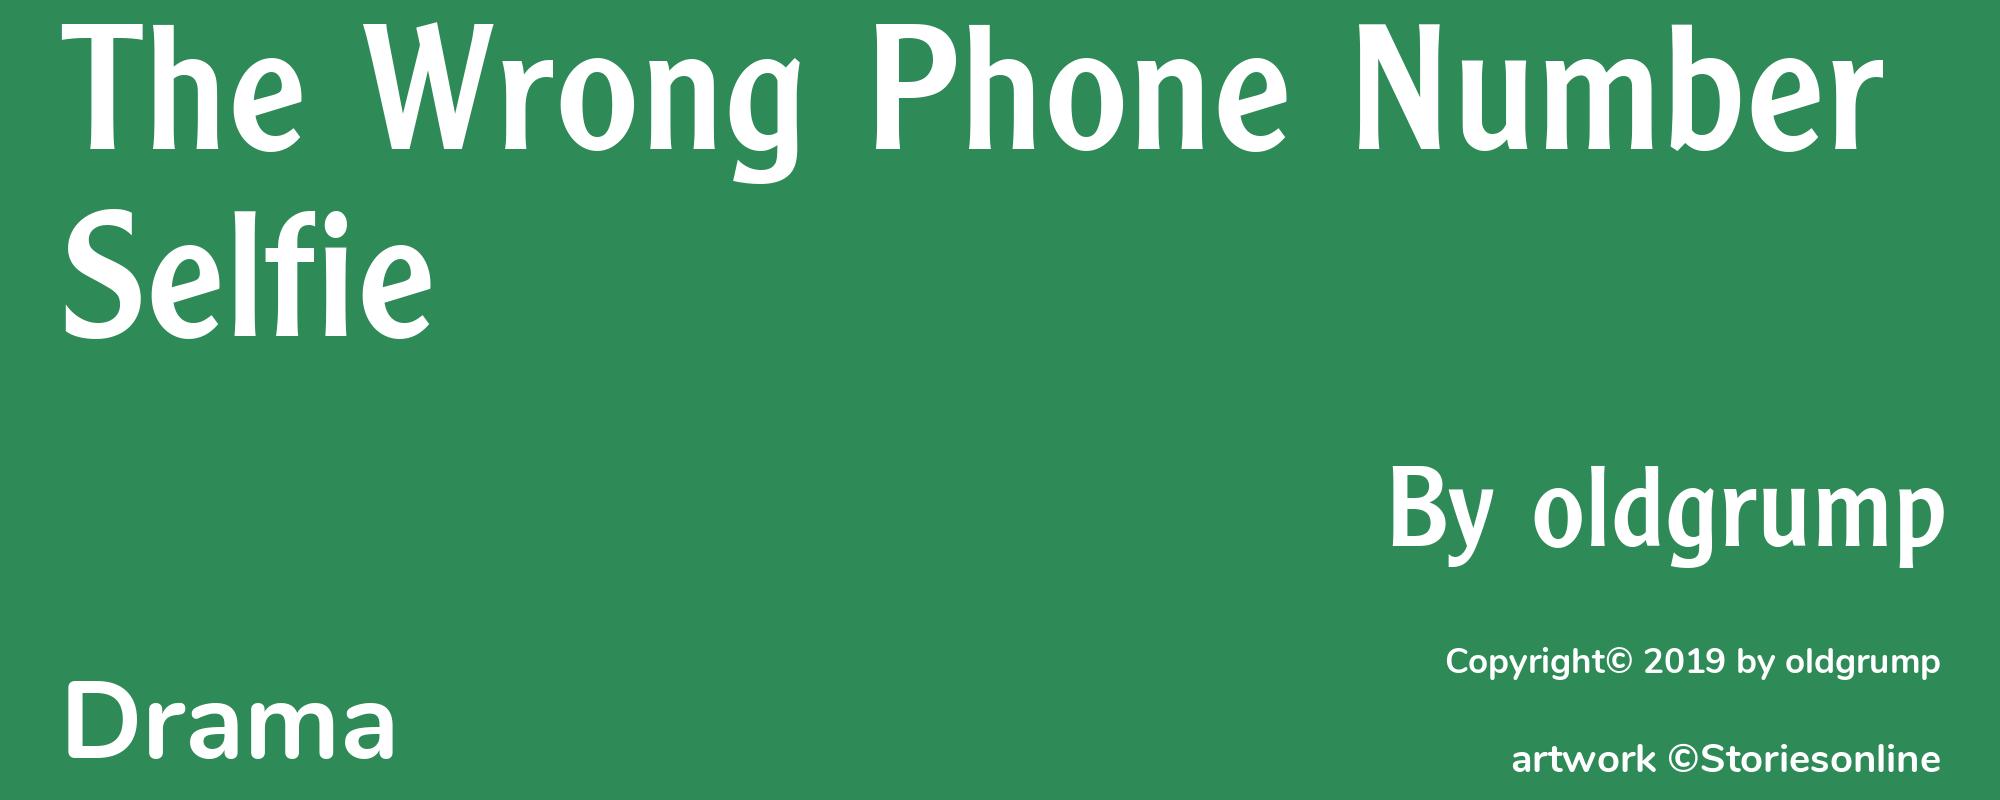 The Wrong Phone Number Selfie - Cover